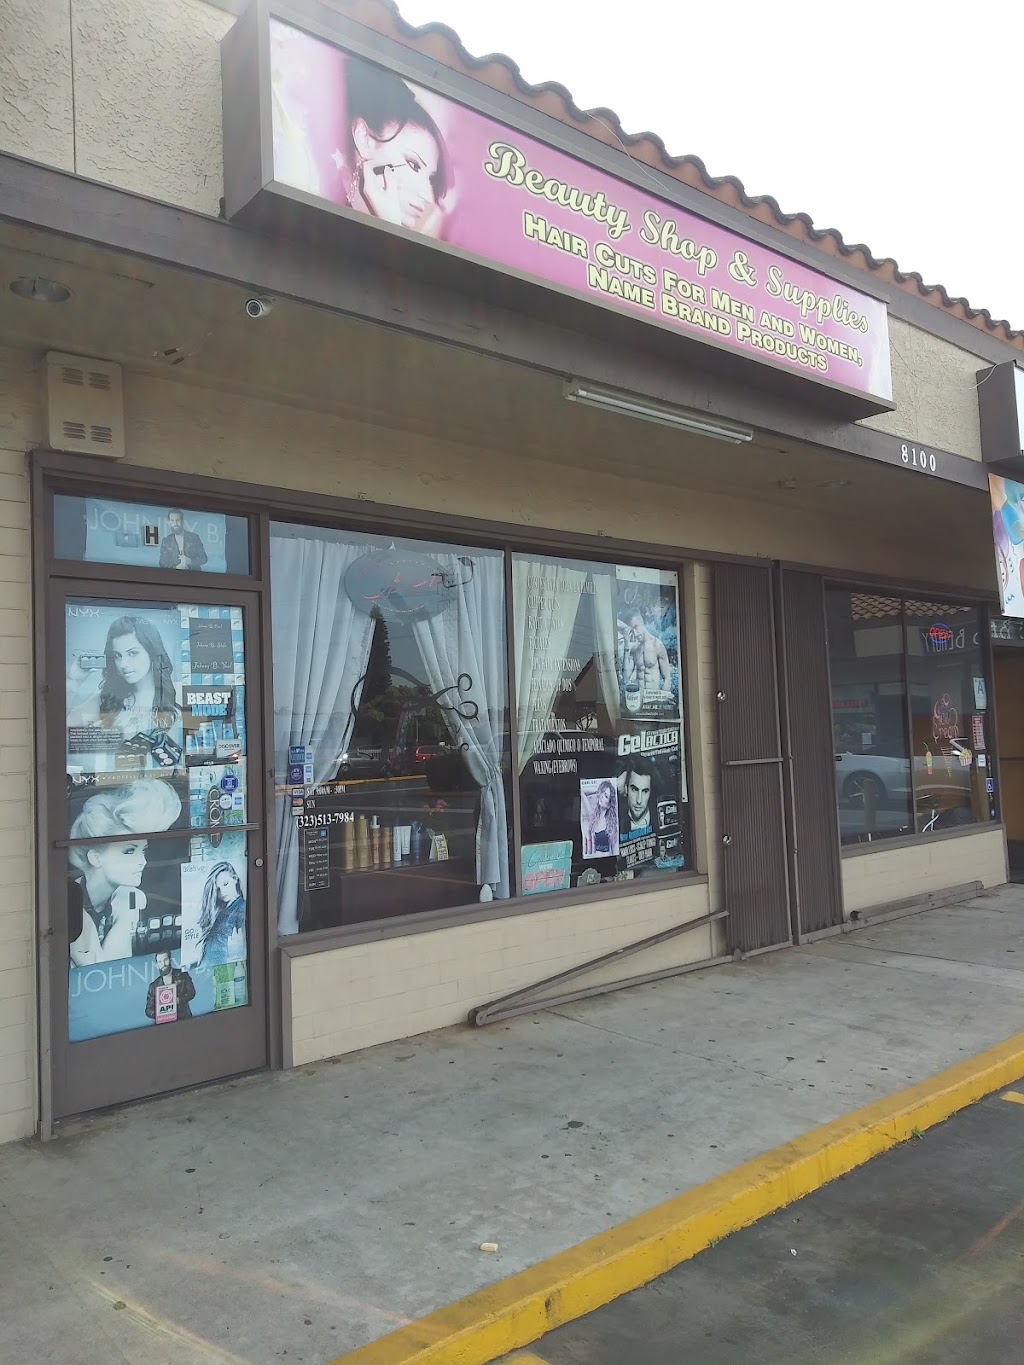 Beauty shop and Supplies | 8100 California Ave # H, South Gate, CA 90280 | Phone: (323) 513-7984